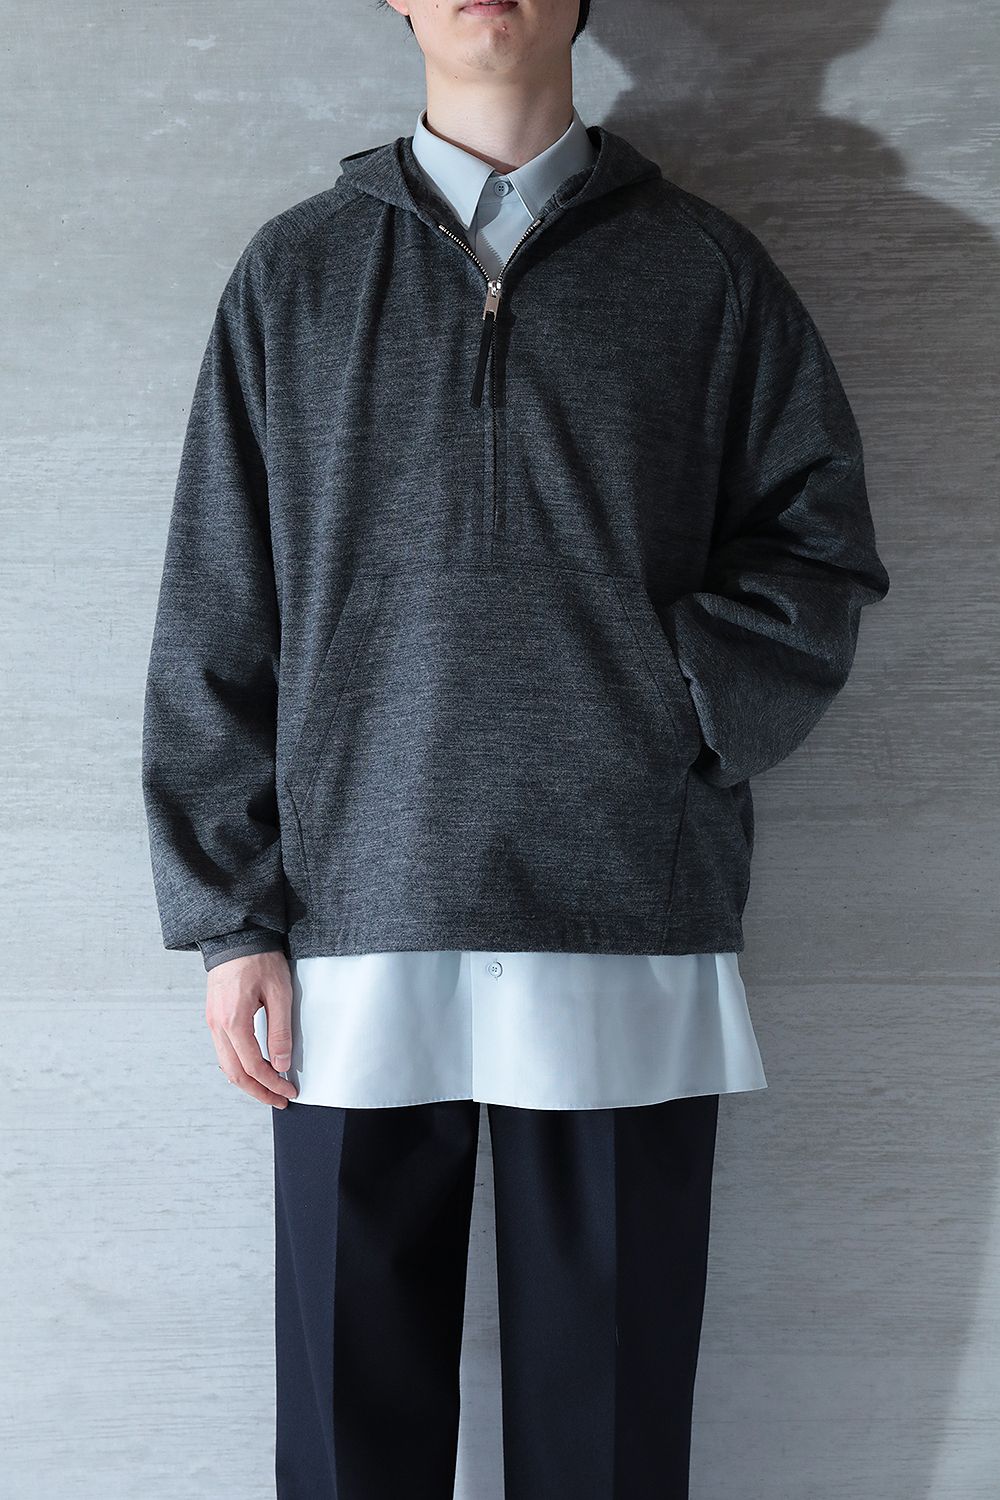 THE RERACS - 【ラスト1点】RERACS HALF ZIP HOODED PULLOVER(TOP GRAY 